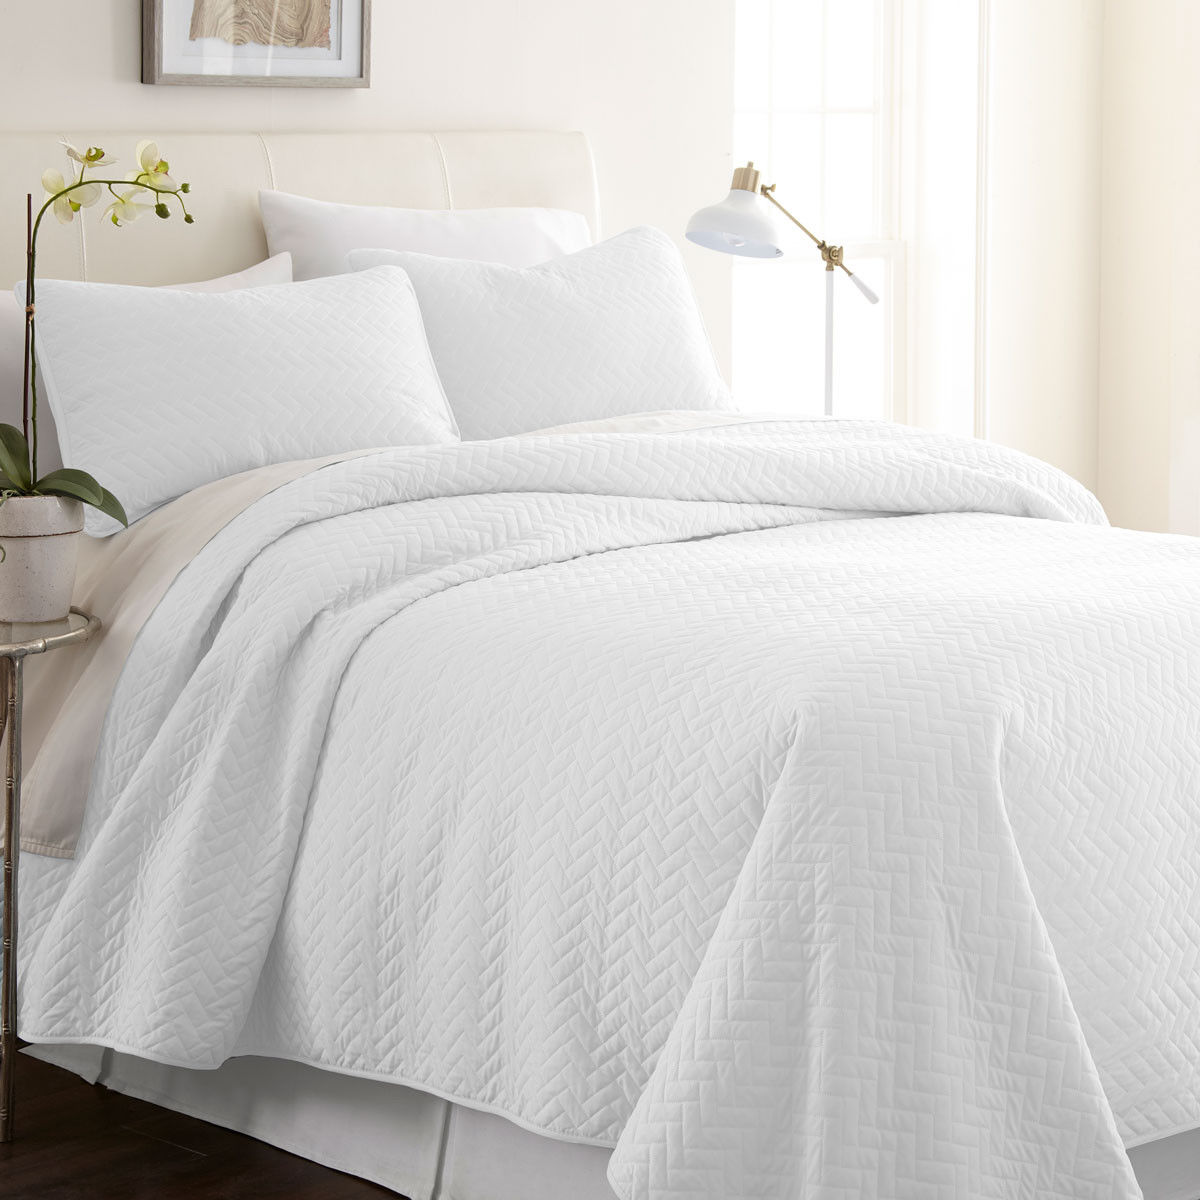 What items are included in the 3-Piece Herring Quilted Coverlet Set?